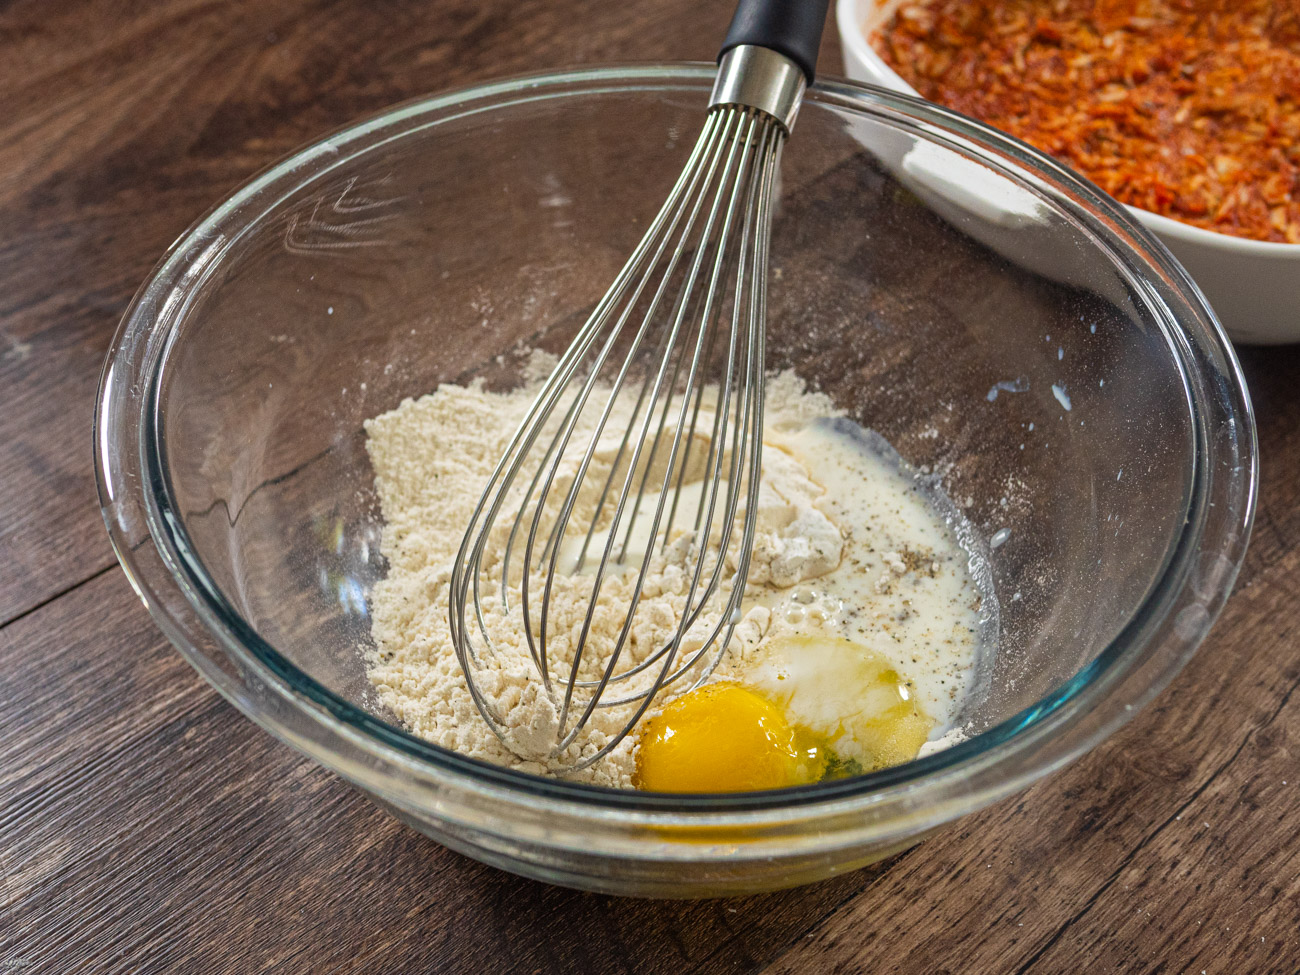 In a separate bowl combine flour, pepper, salt, and baking powder together. Add oil to dry ingredients and combine. Then add milk and egg and stir until batter is just combined.